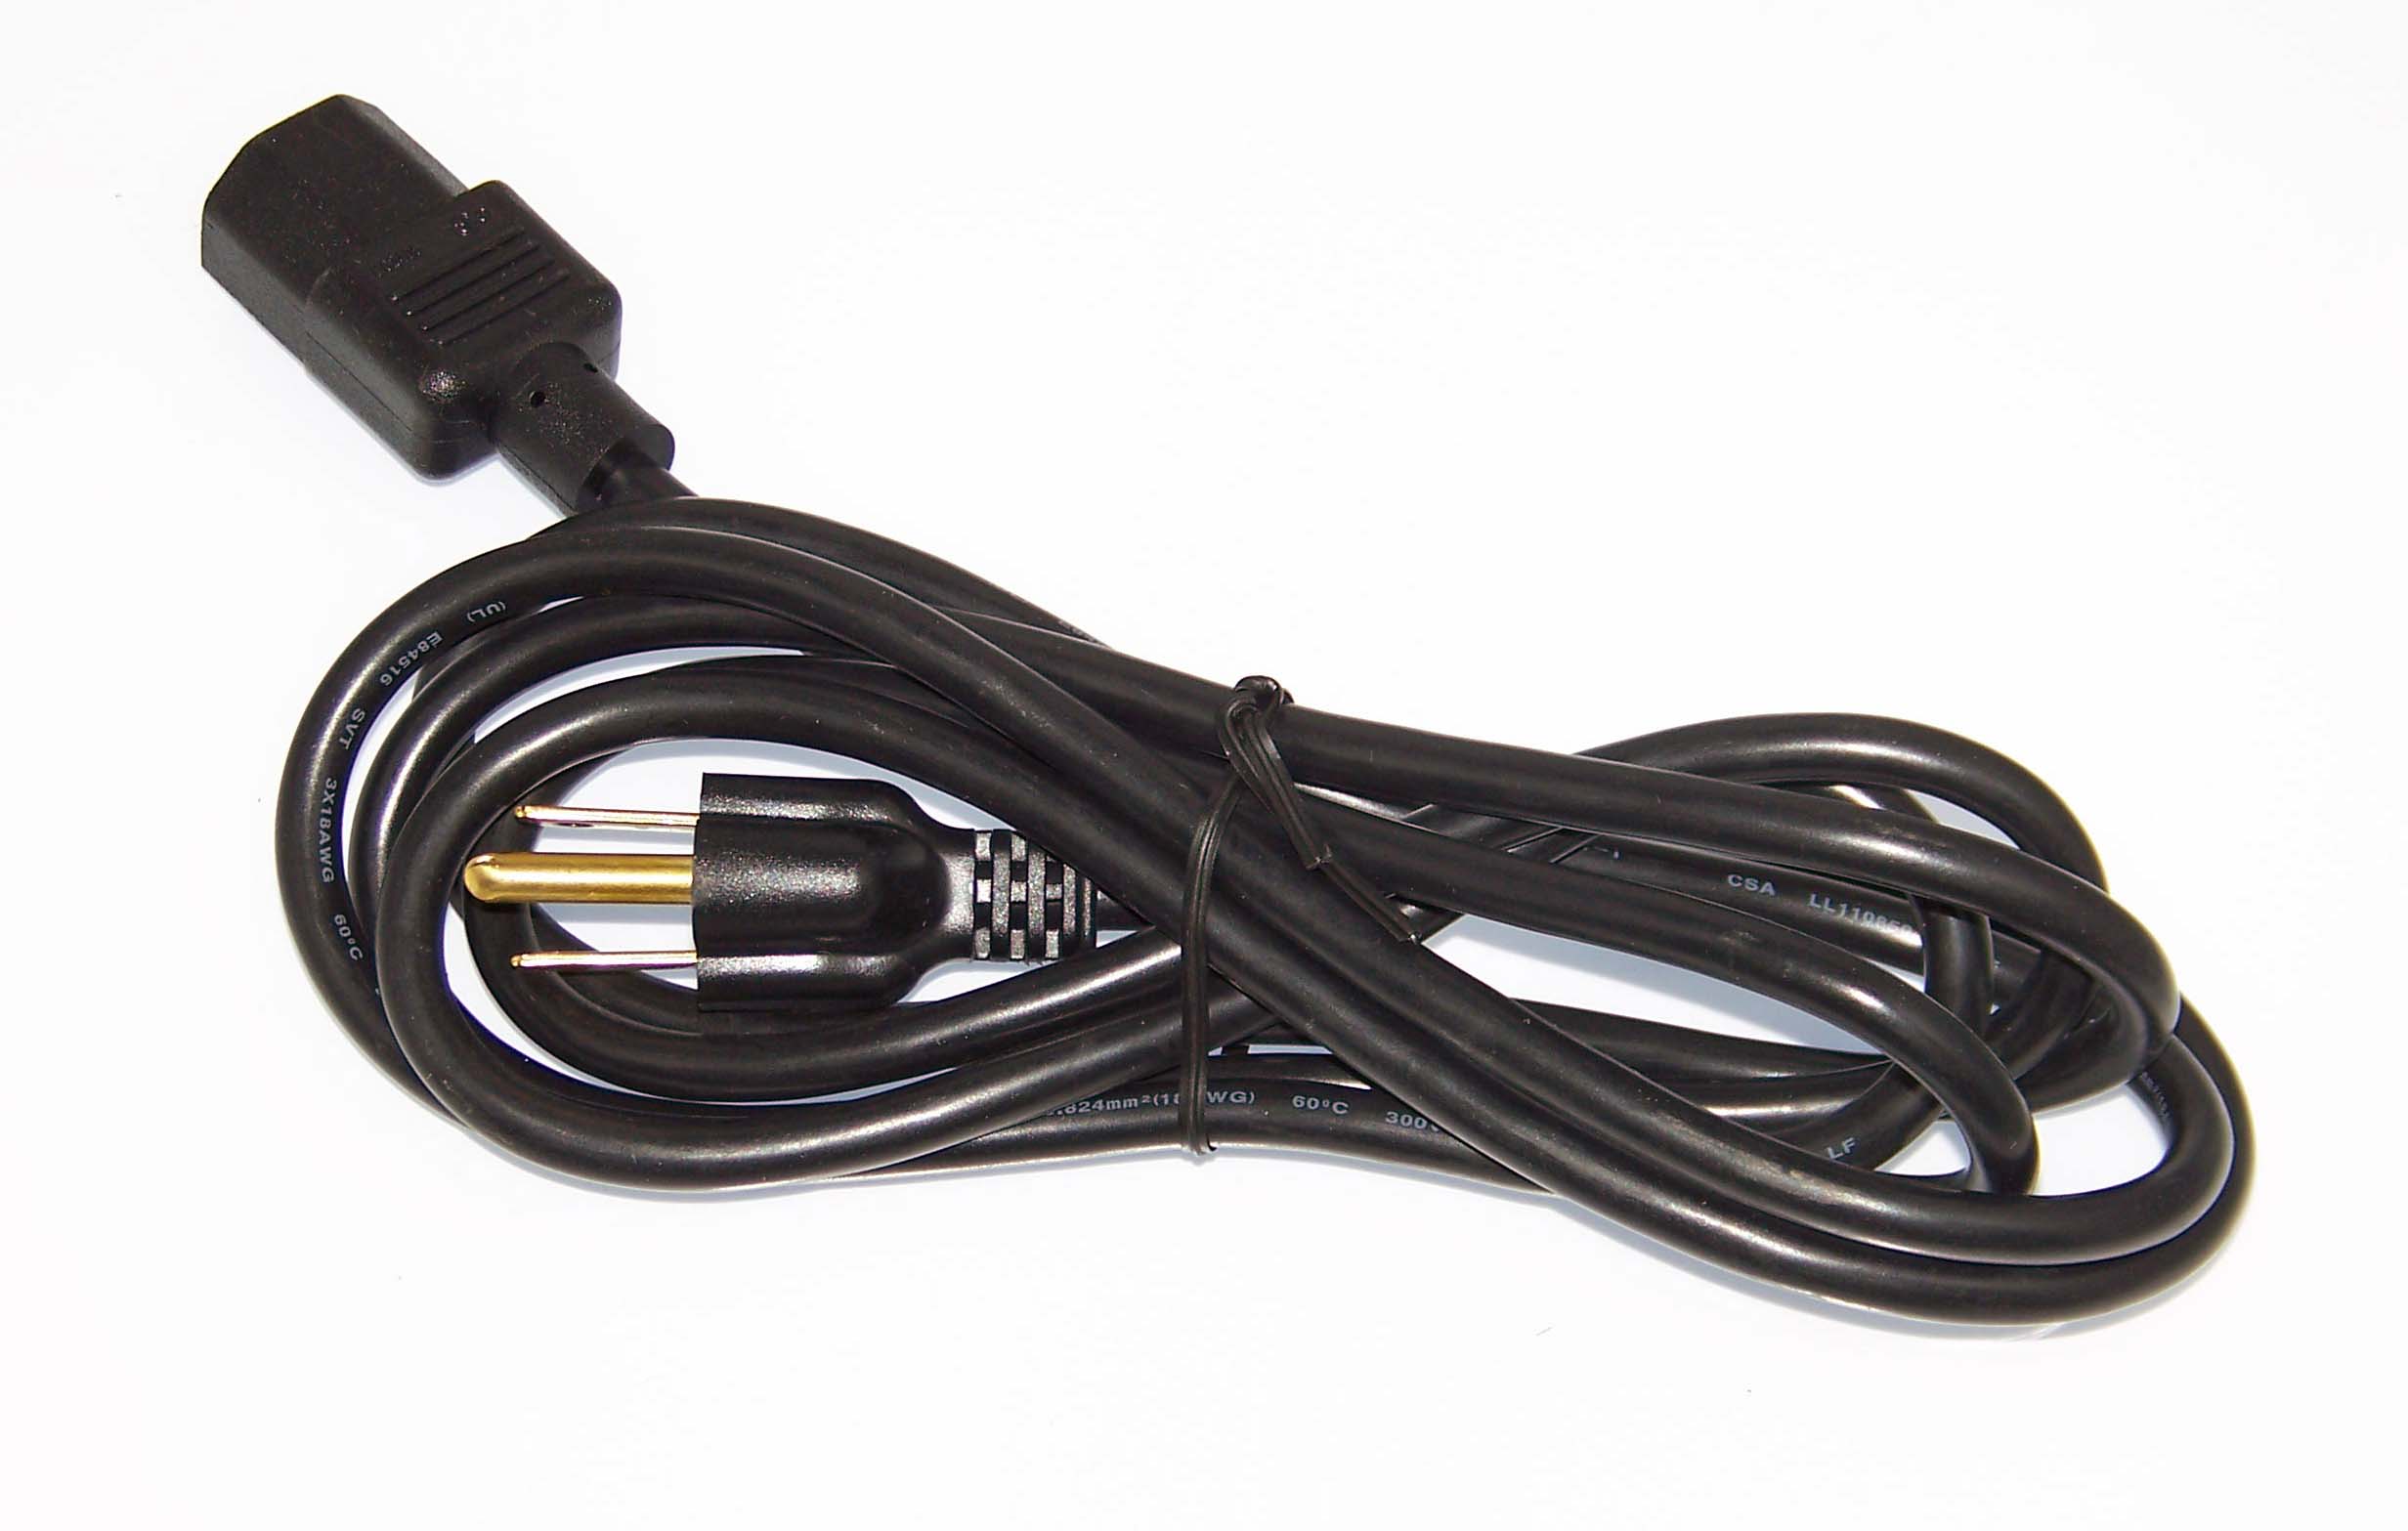 Epson OEM Epson Projector Power Cord Cable Cord For EB-2040, EB-2055, EB-2065, EB-2140W